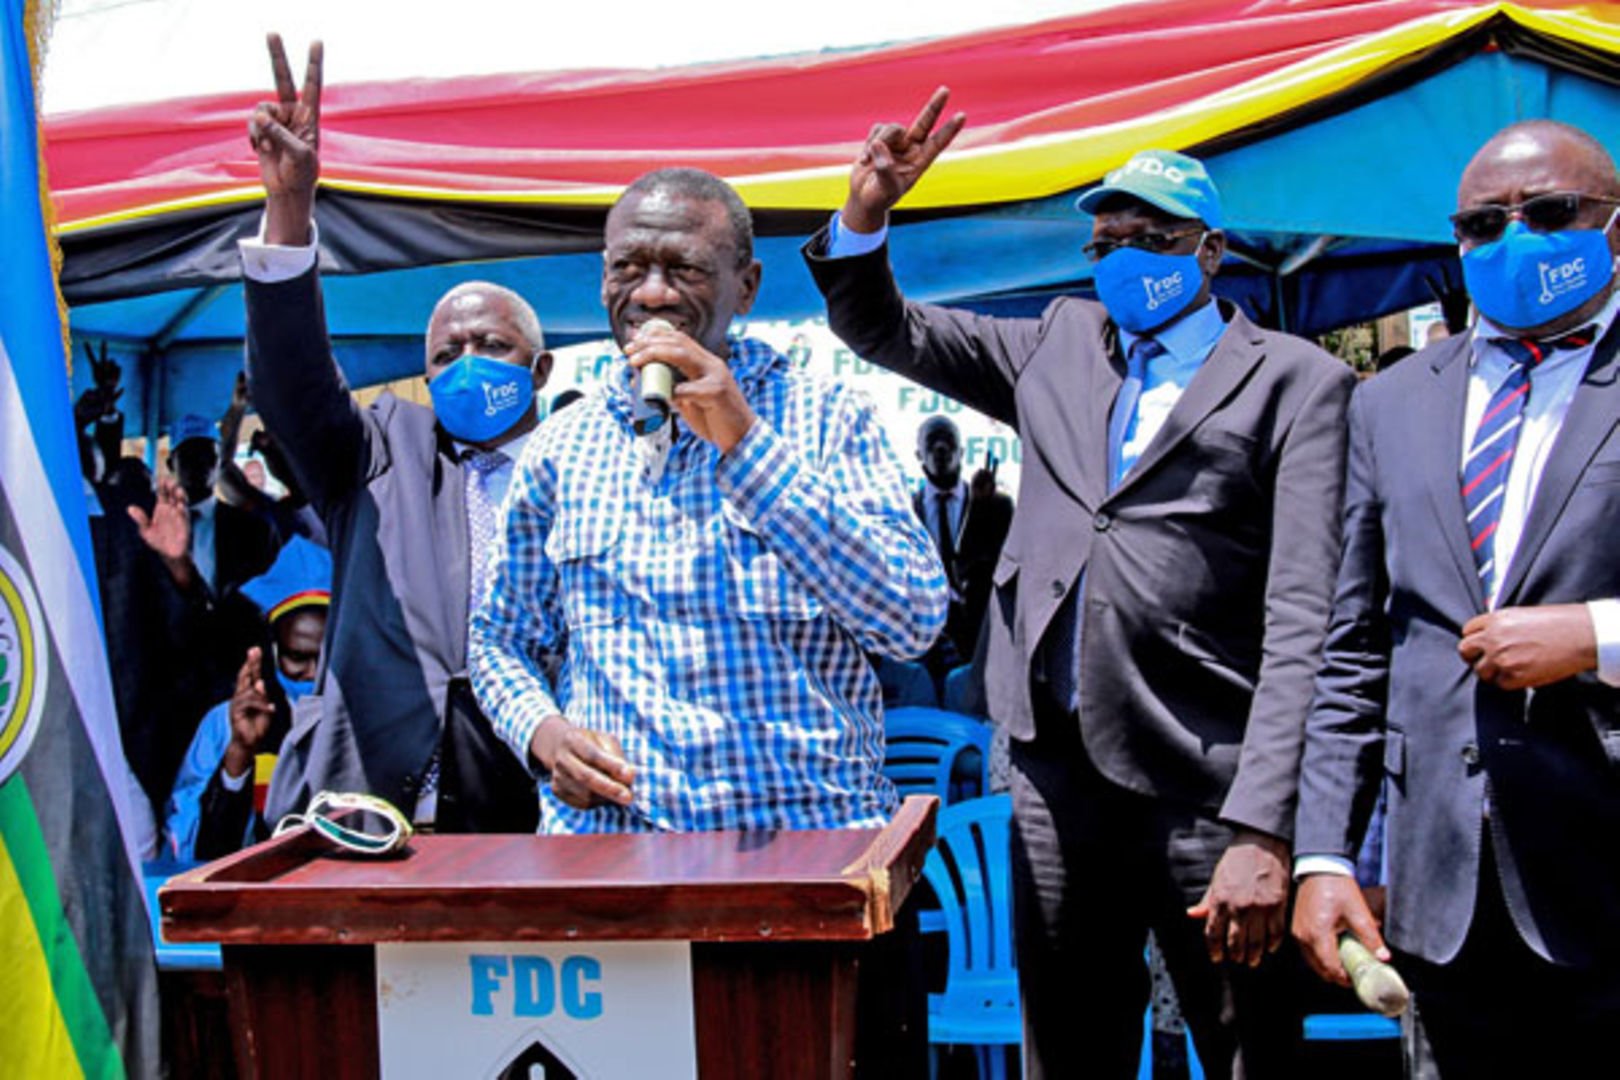 FDC Ends Affiliation with Besigye's People's Government in Key Political Development